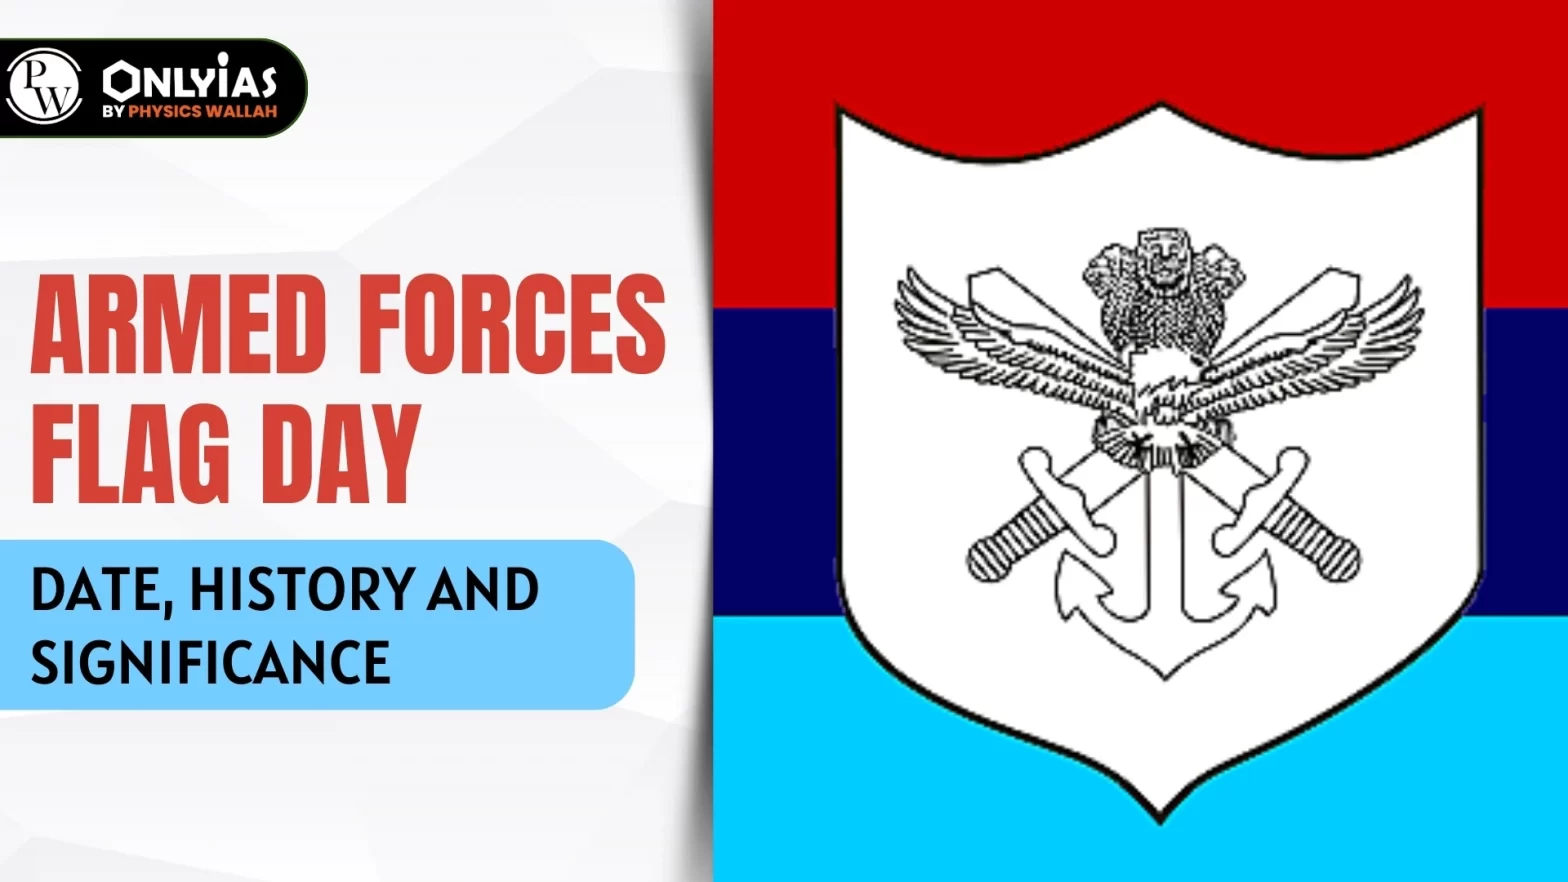 Armed Forces Flag Day: Date, History and Significance